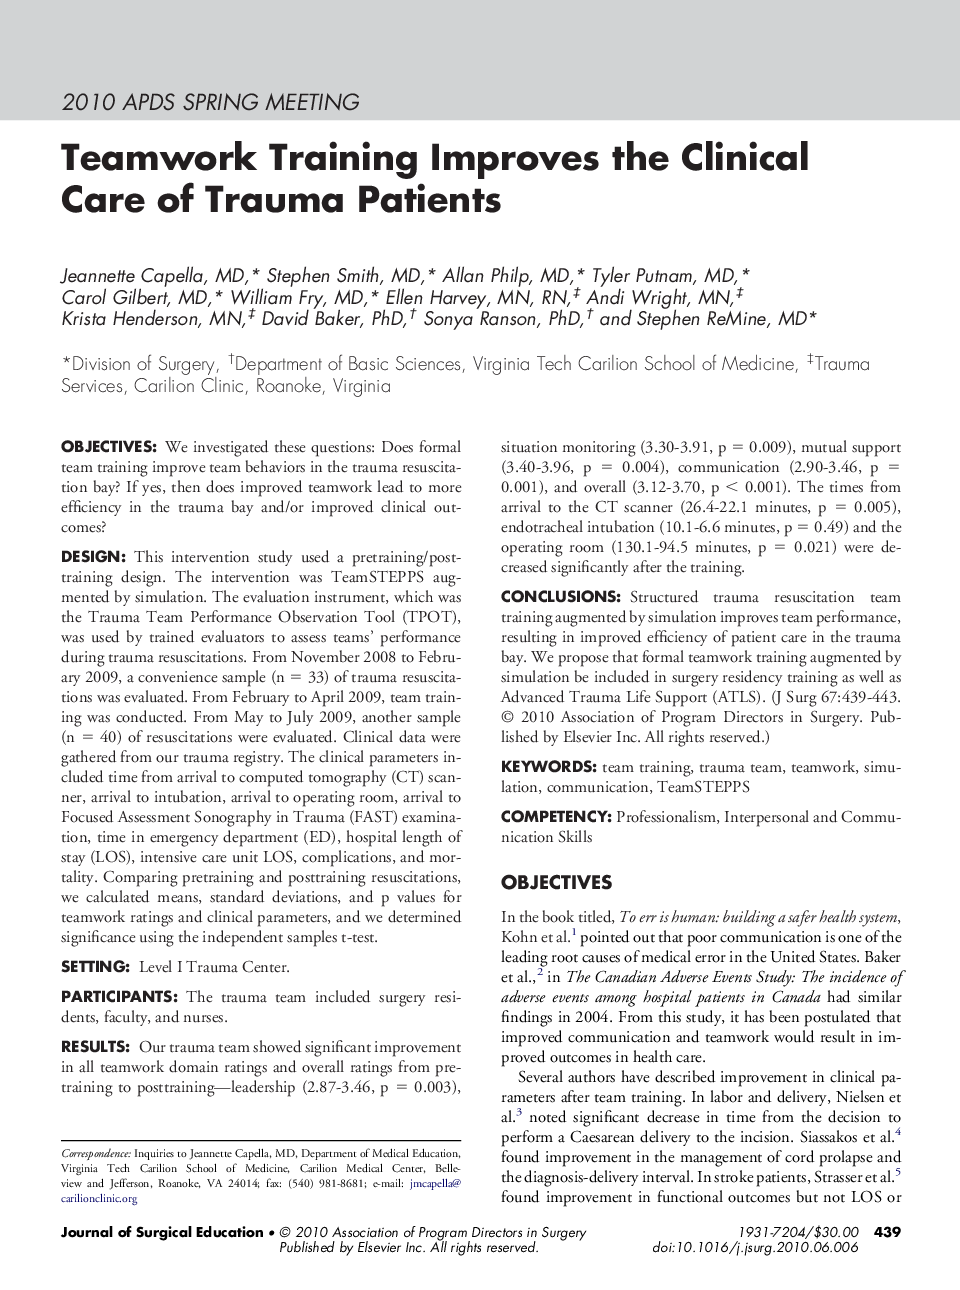 Teamwork Training Improves the Clinical Care of Trauma Patients